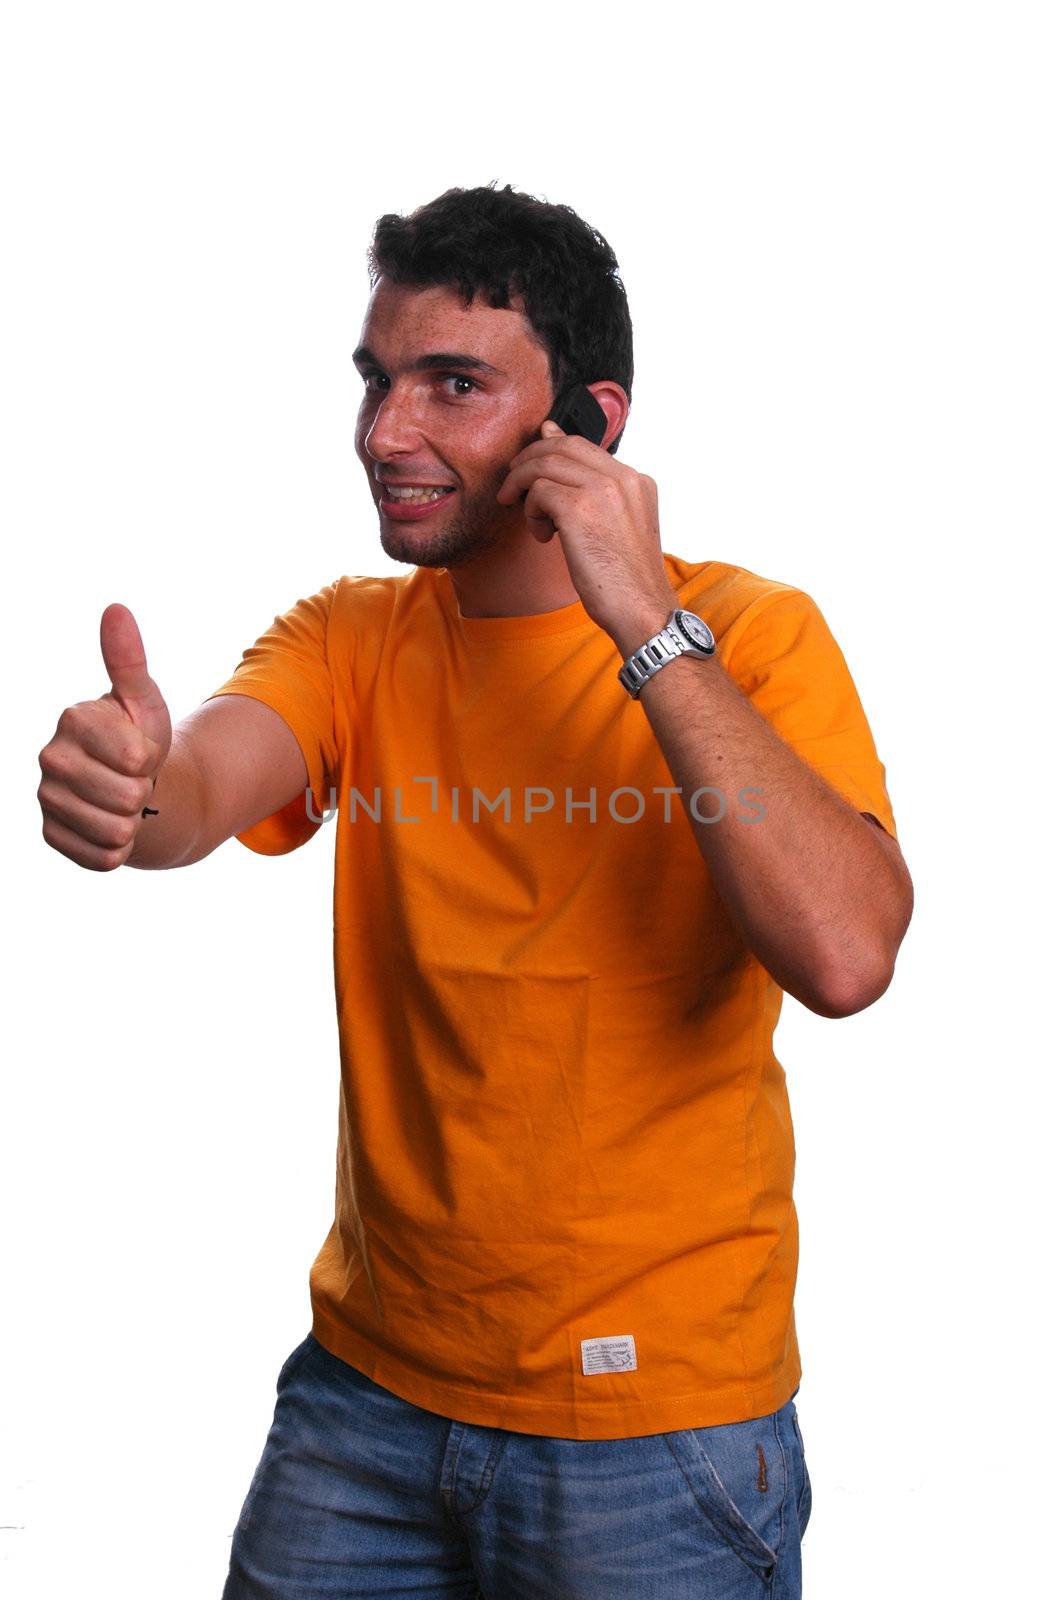 usiness customer services thumbs up over a white background by raalves